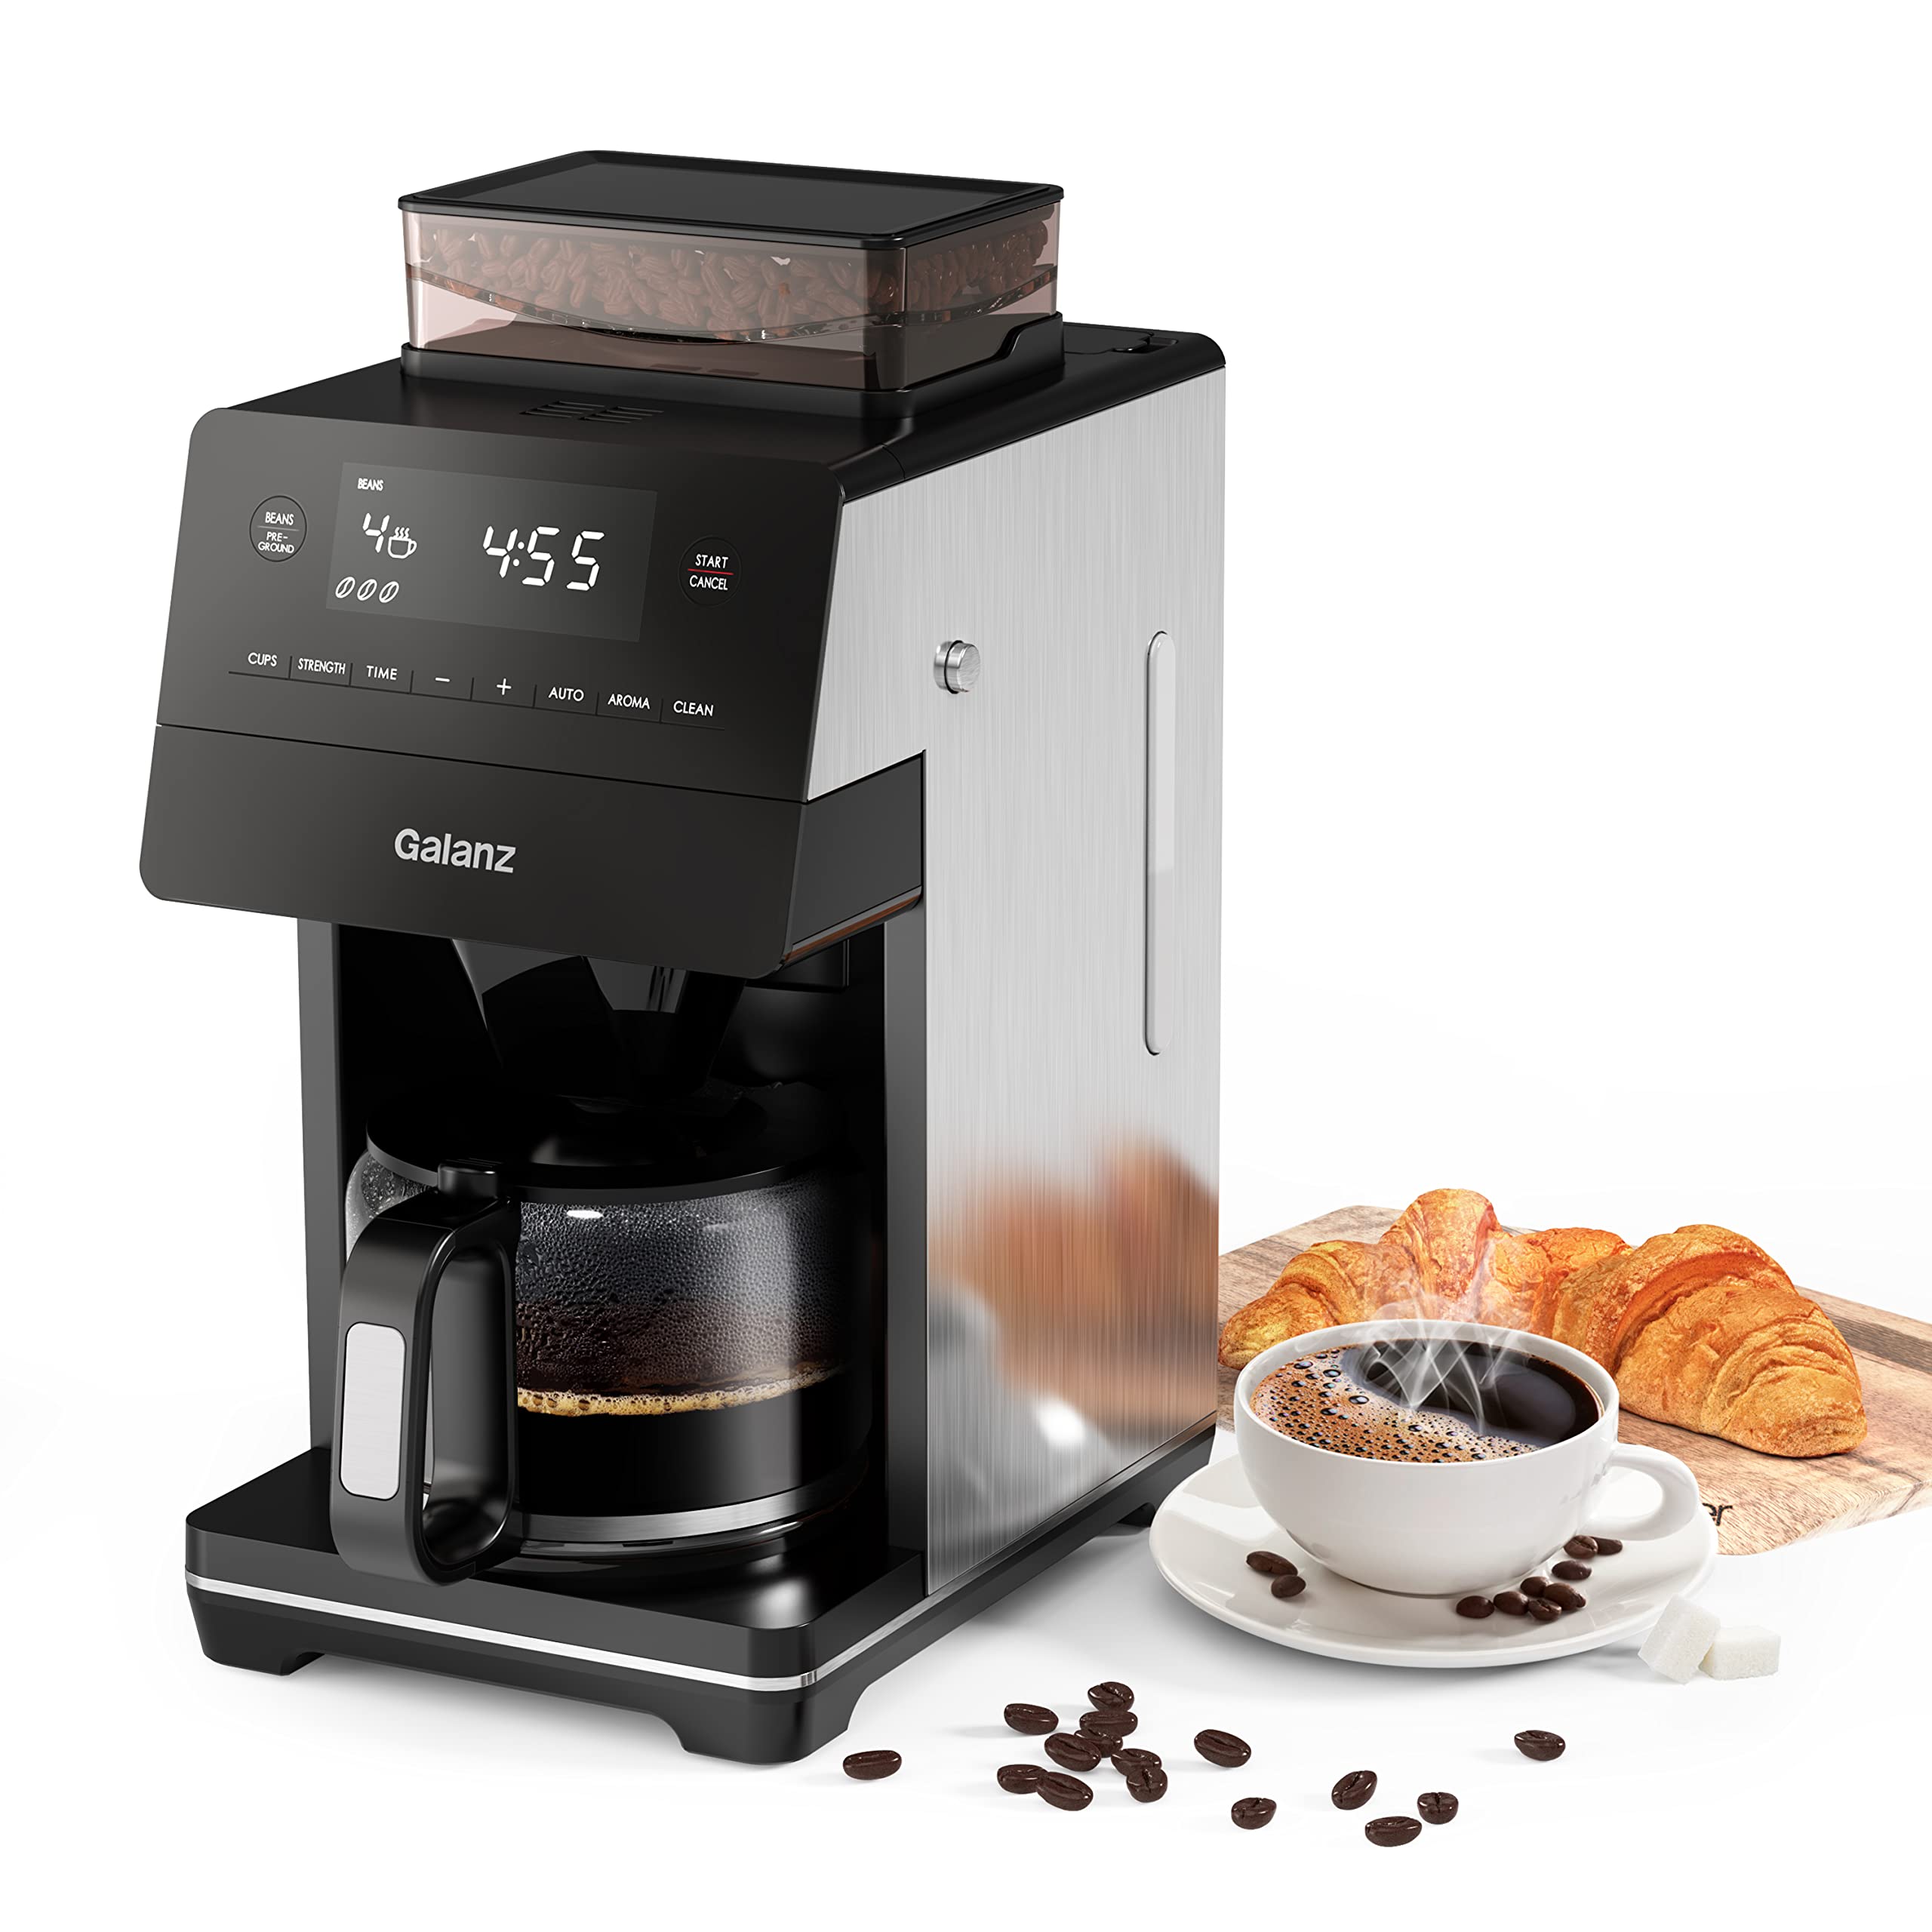 Galanz Grind and Brew Coffee Maker